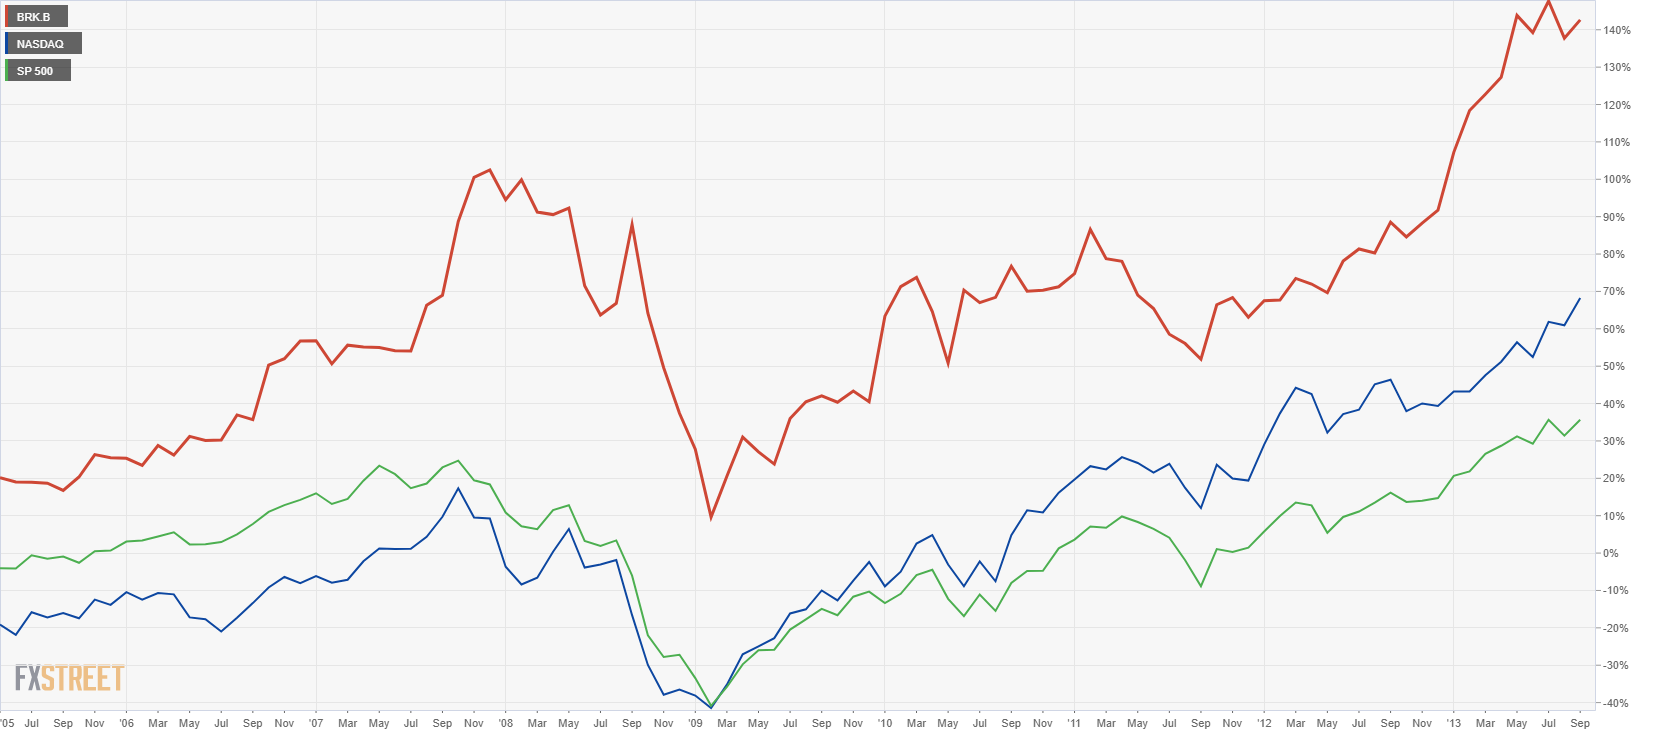 BRK.B performance vs NASDAQ and S&P 500 (between 2005 and 2014)